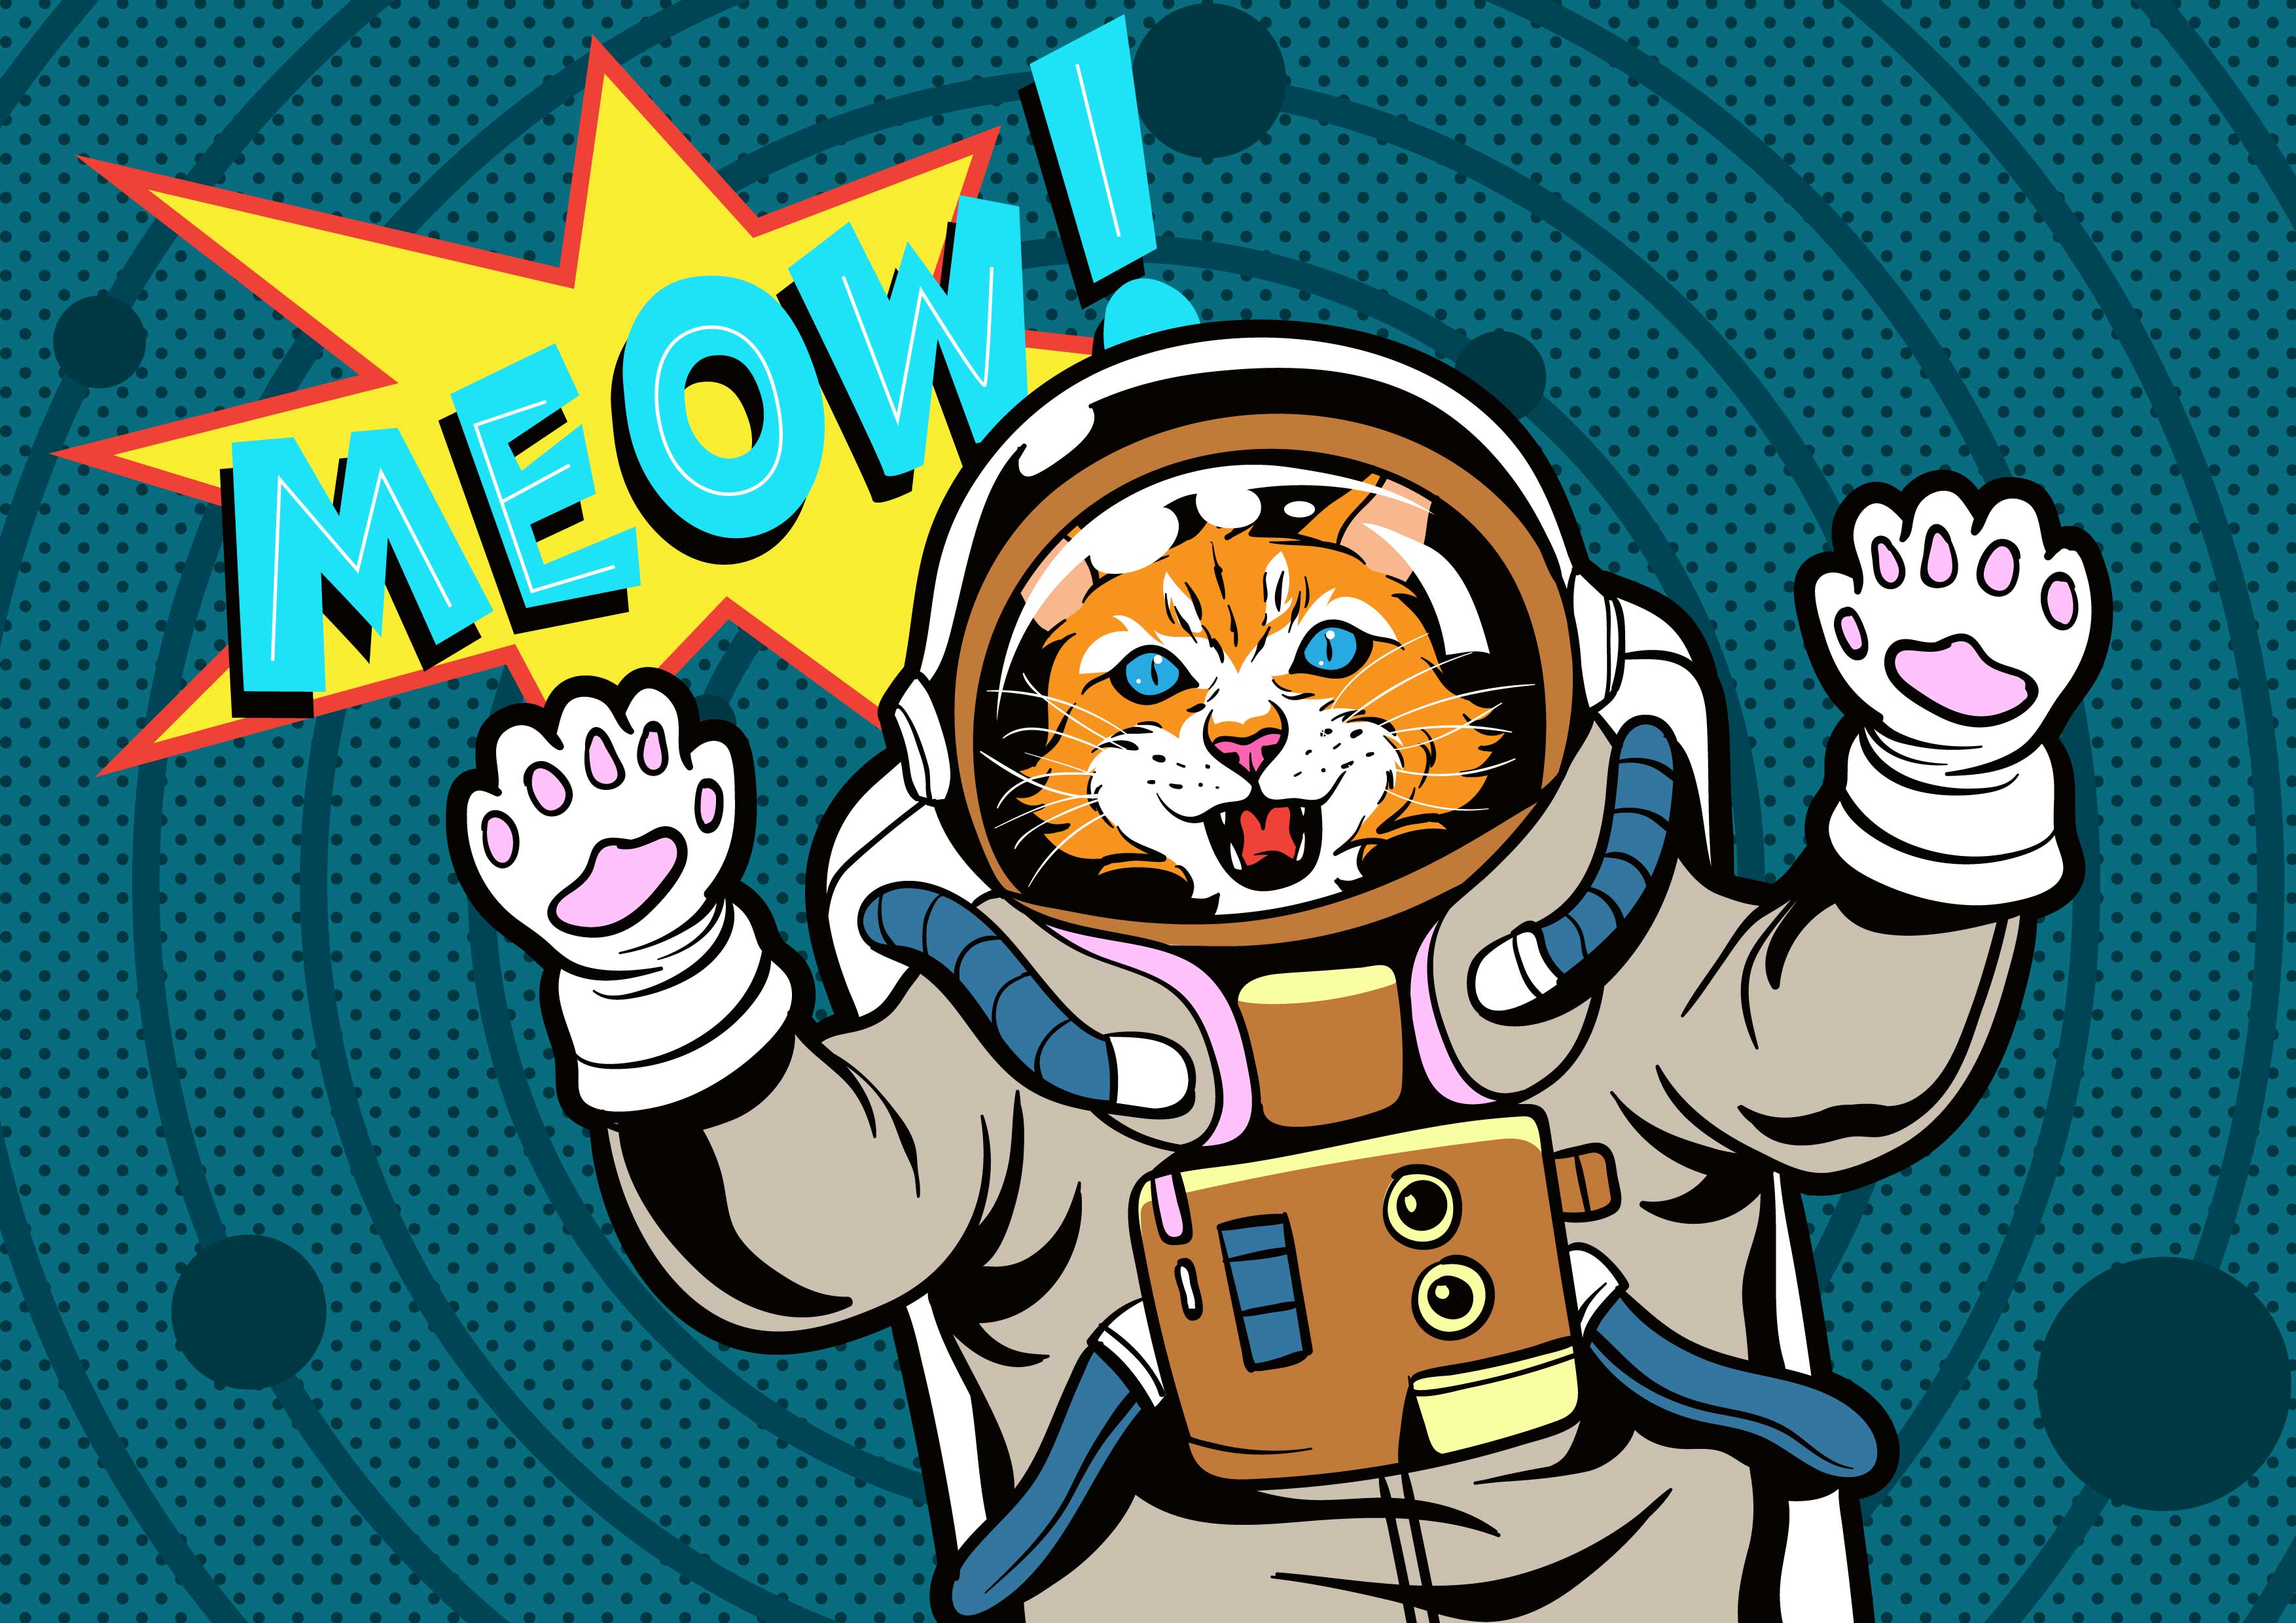 HD desktop wallpaper featuring a pop art style illustration of an astronaut tiger with the word MEOW in a speech bubble.